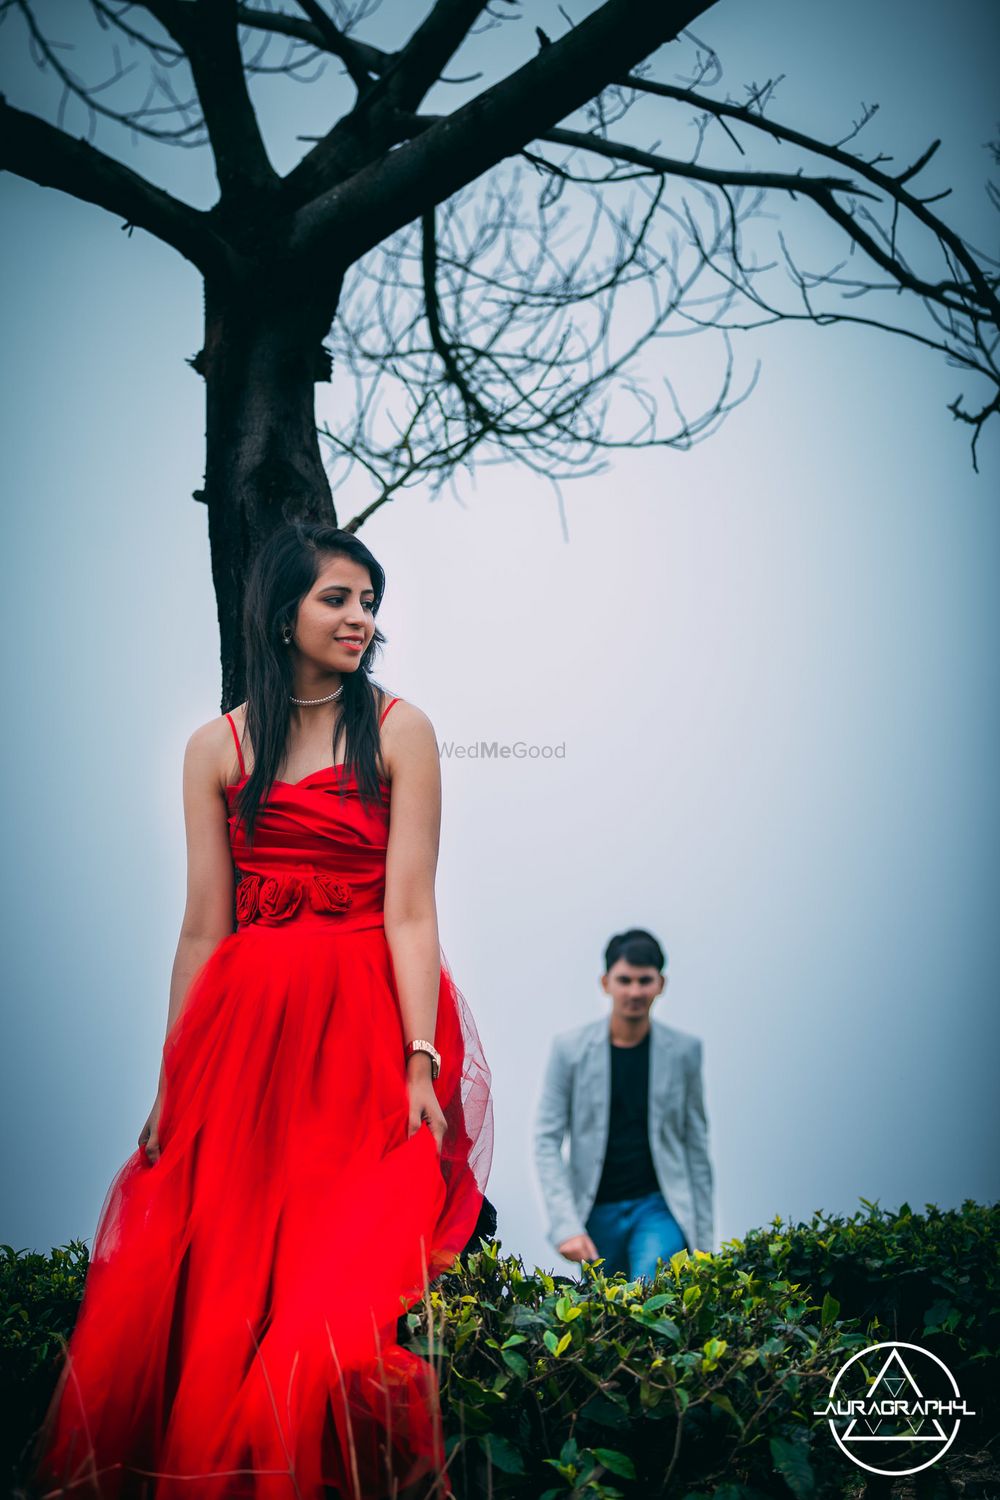 Photo From Poorvi & Bhavesh Pre-Wedding - By Auragraphy